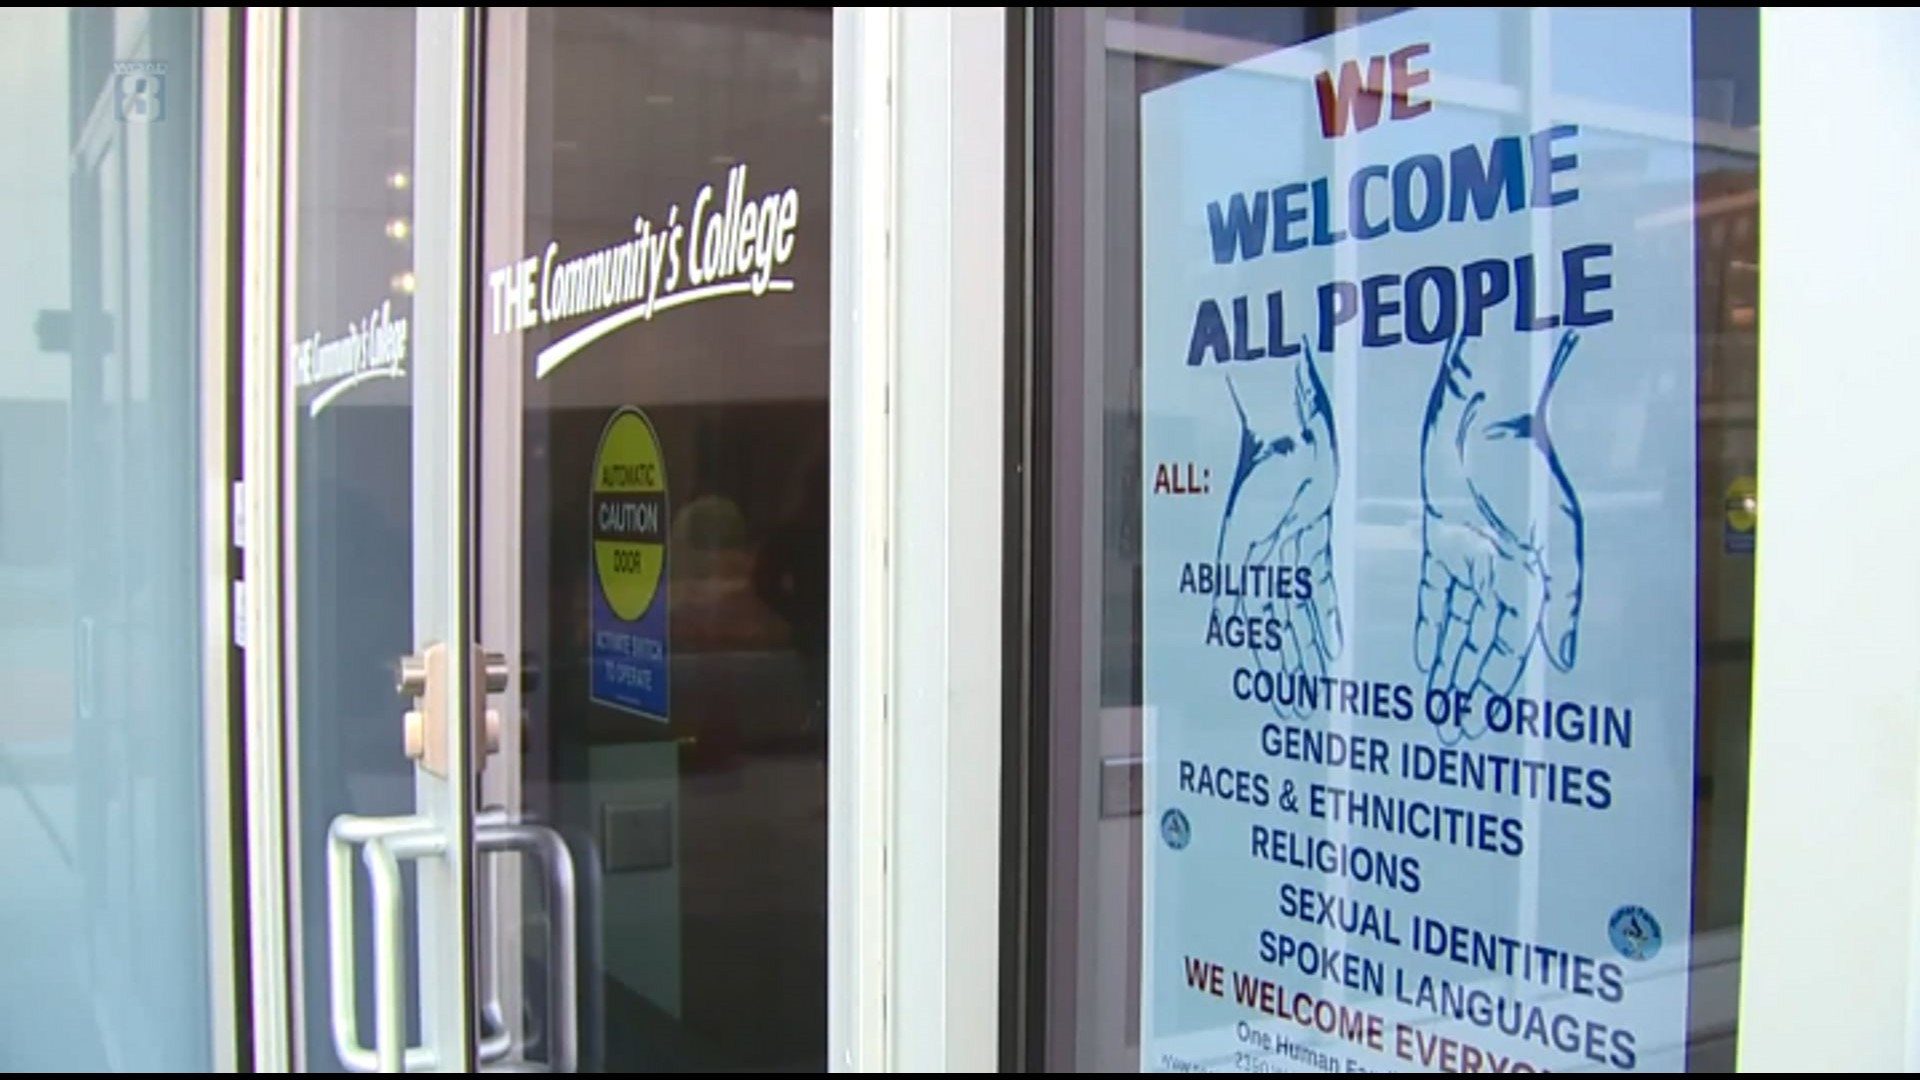 "Welcoming Business" signs push for a more inclusive community.